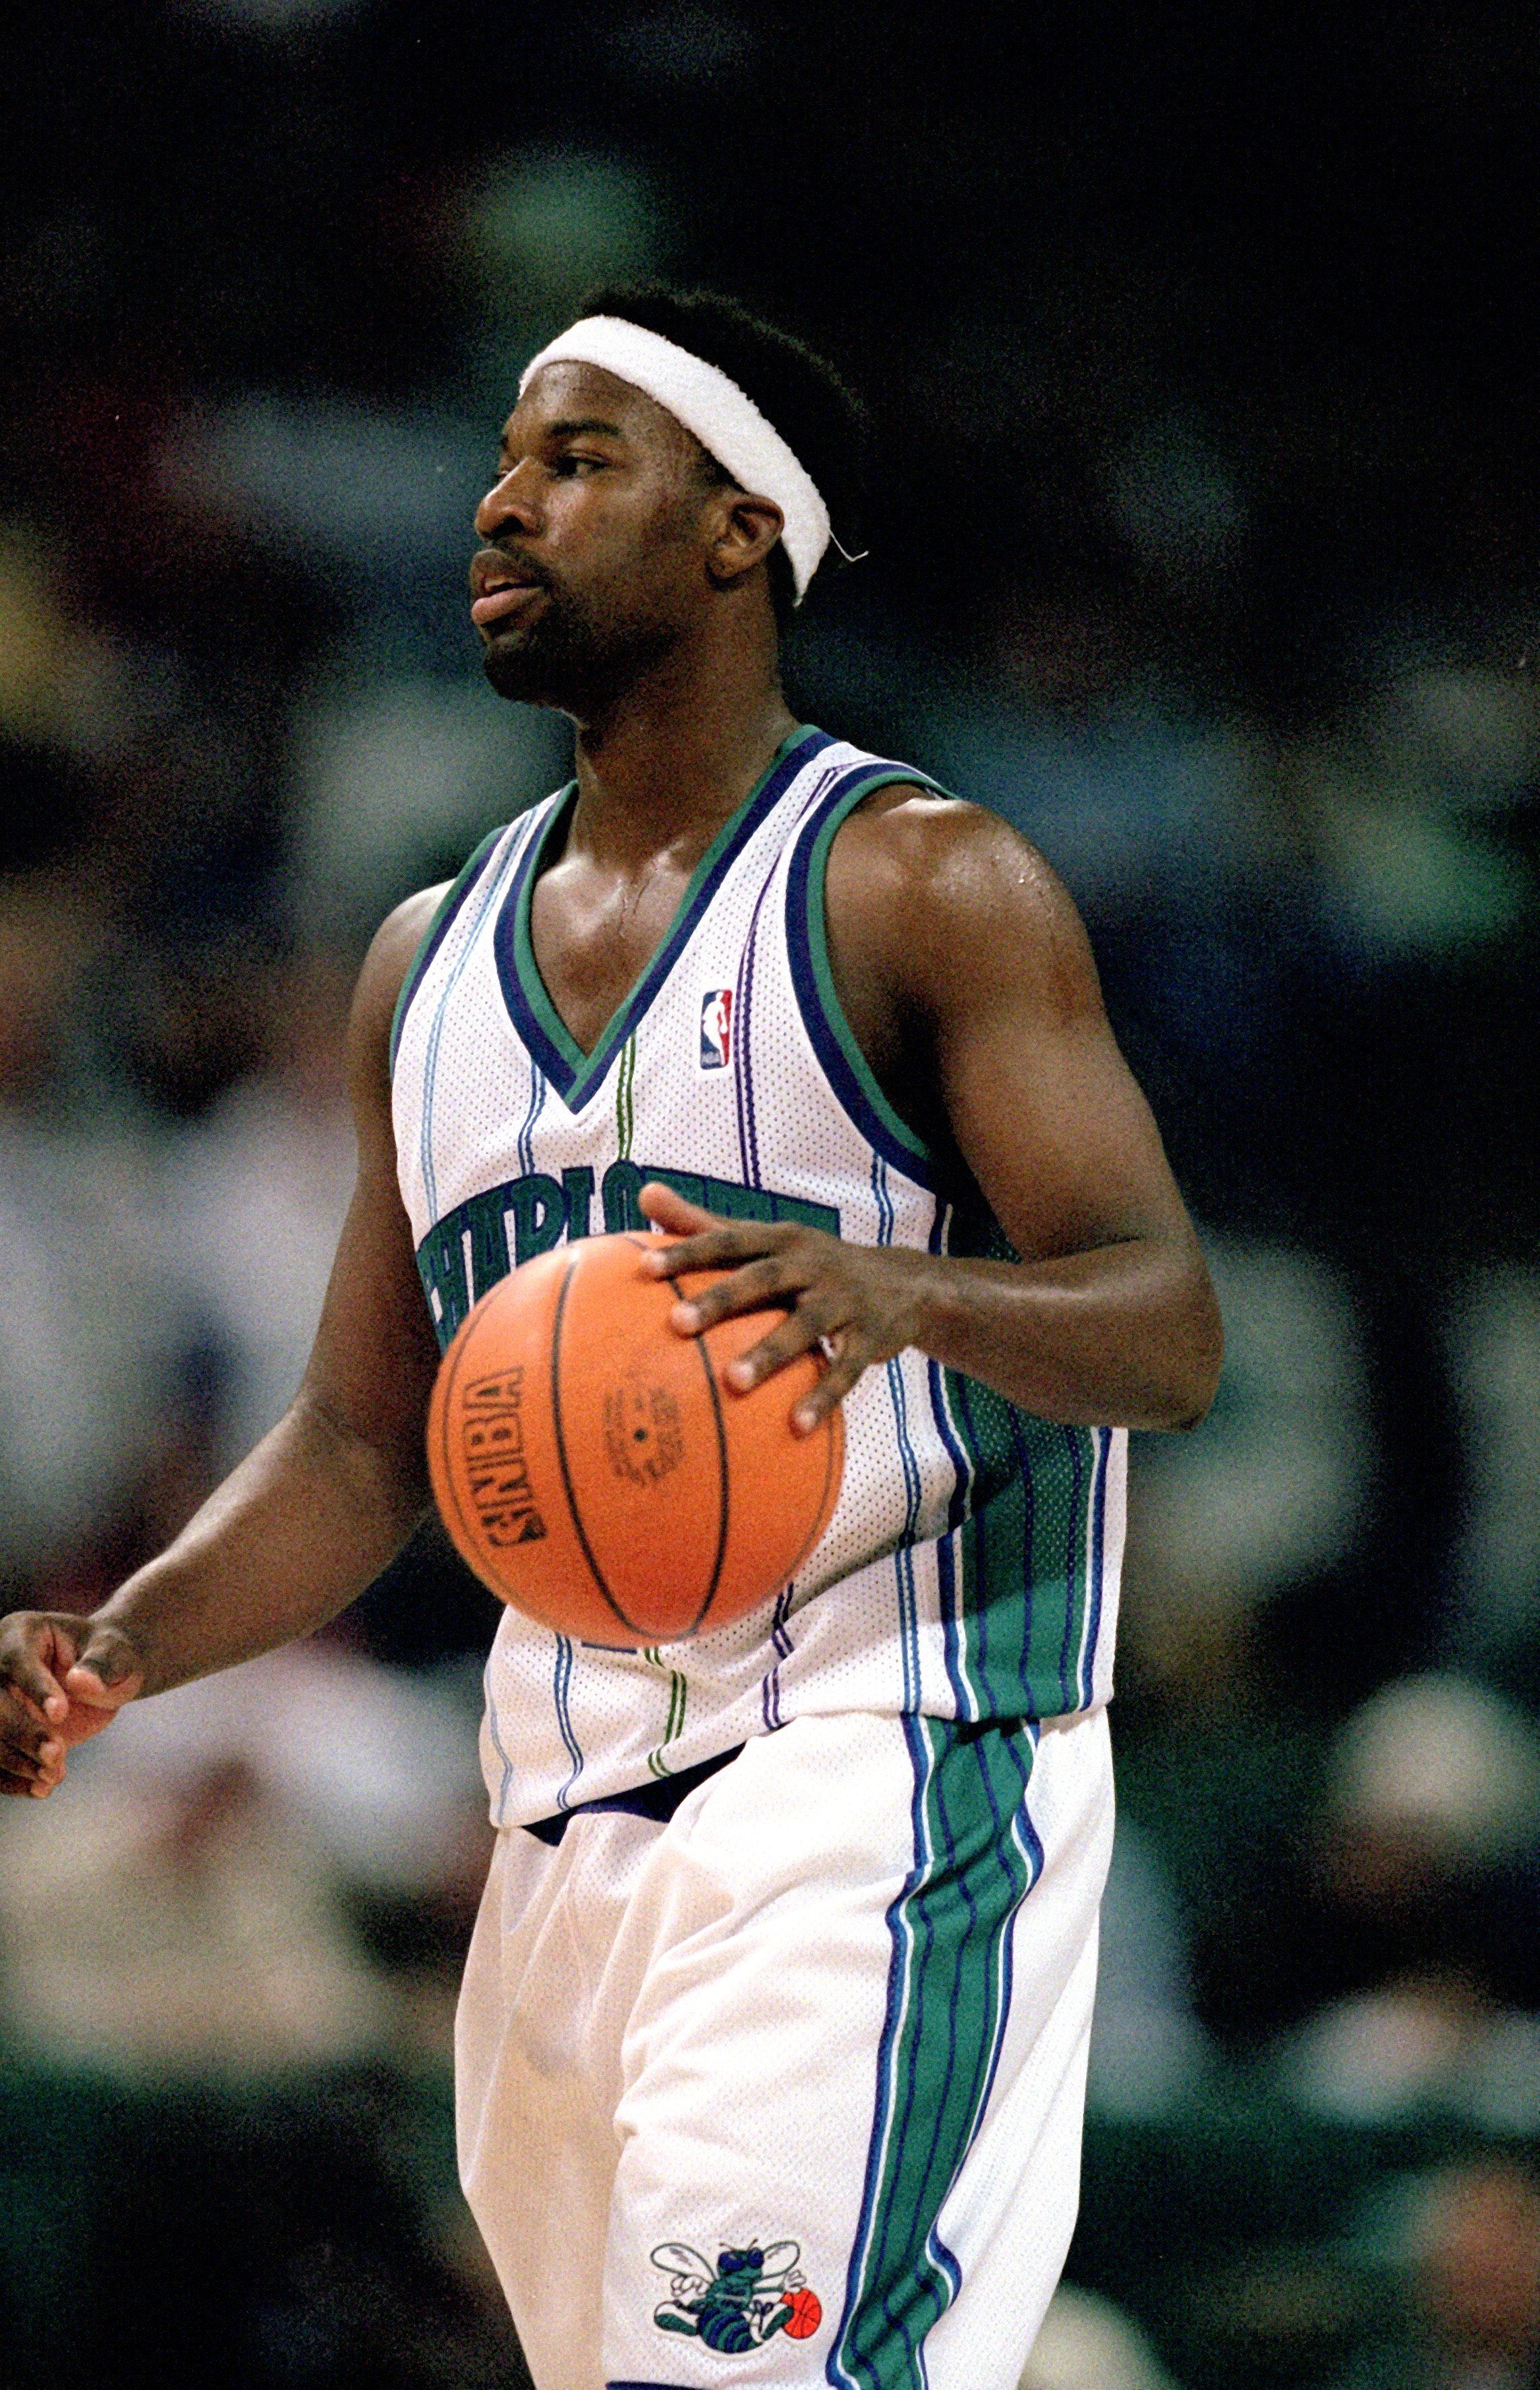 1 Nov 2000:  Baron Davis #1 of the Charlotte Hornets dribbles the ball on the court during the game against the Washington Wizards at the Charlotte Coliseum in Charlotte, North Carolina. The Wizards defeated the Hornets 95-77. NOTE TO USER: It is expressl